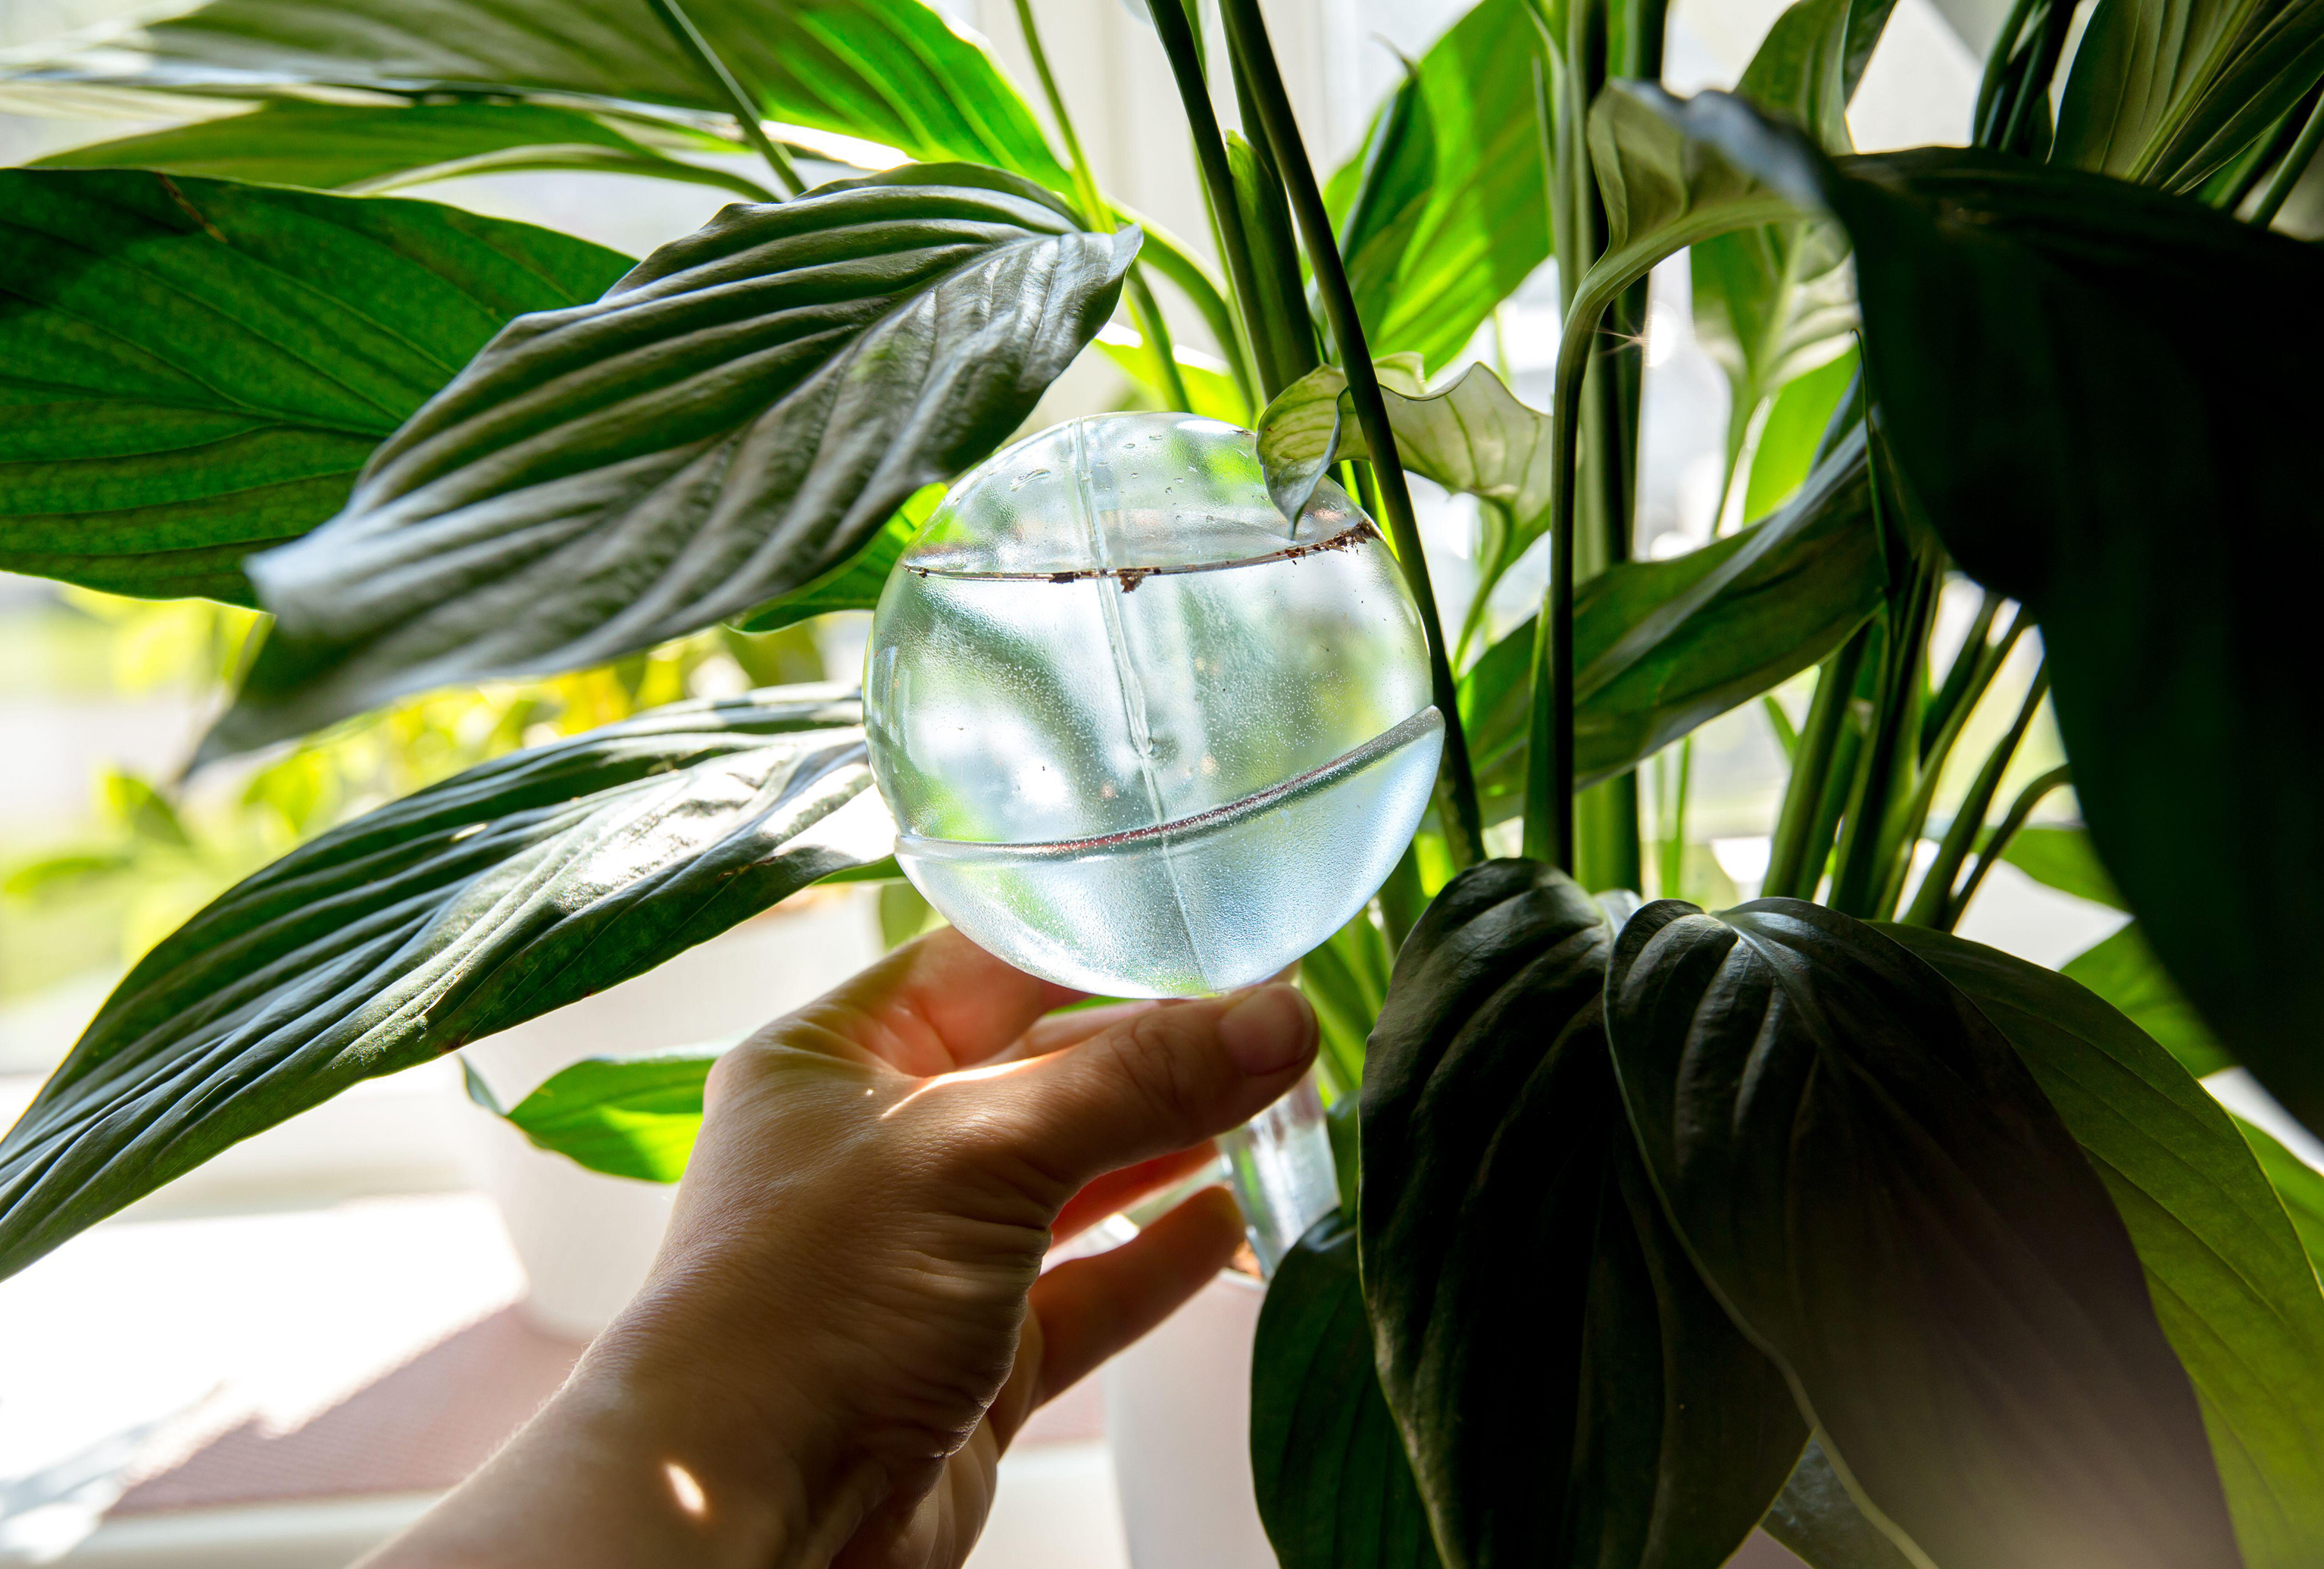 houwplant with a self-watering globe (Alamy/PA)